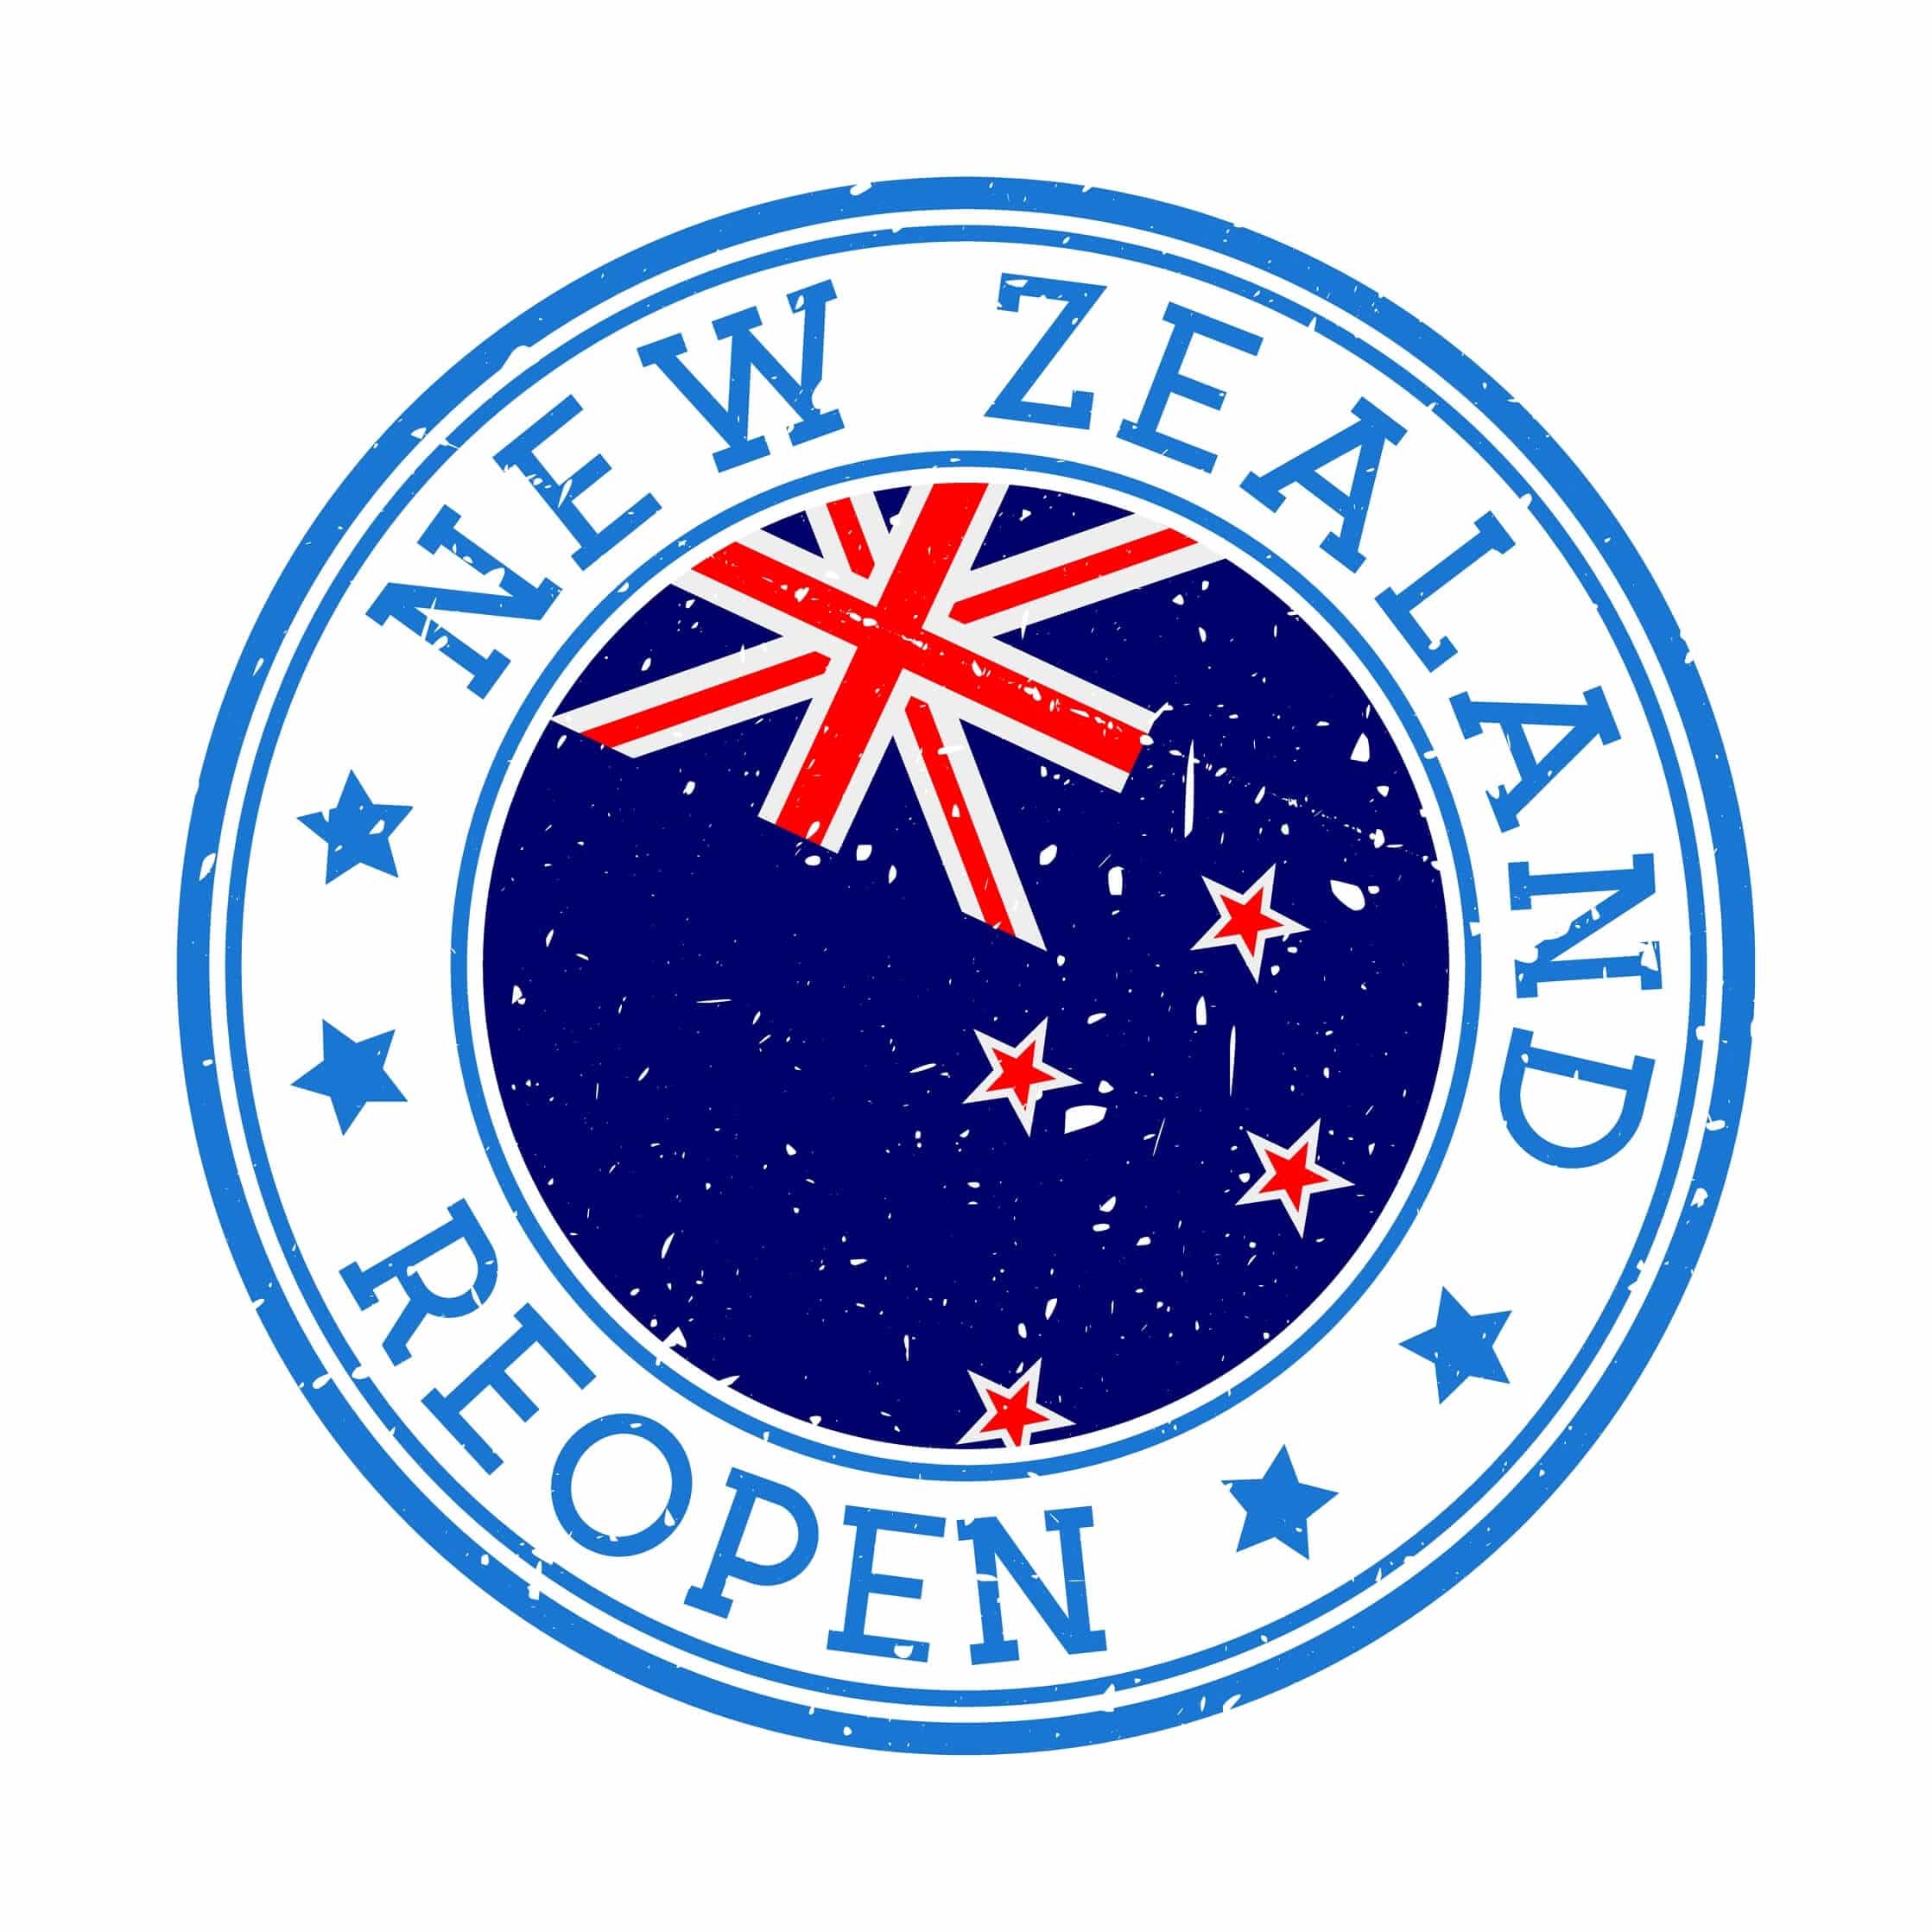 NZD New Zealand Border set to open with proper guidelines to enter and Quarantine period set to 7 days.